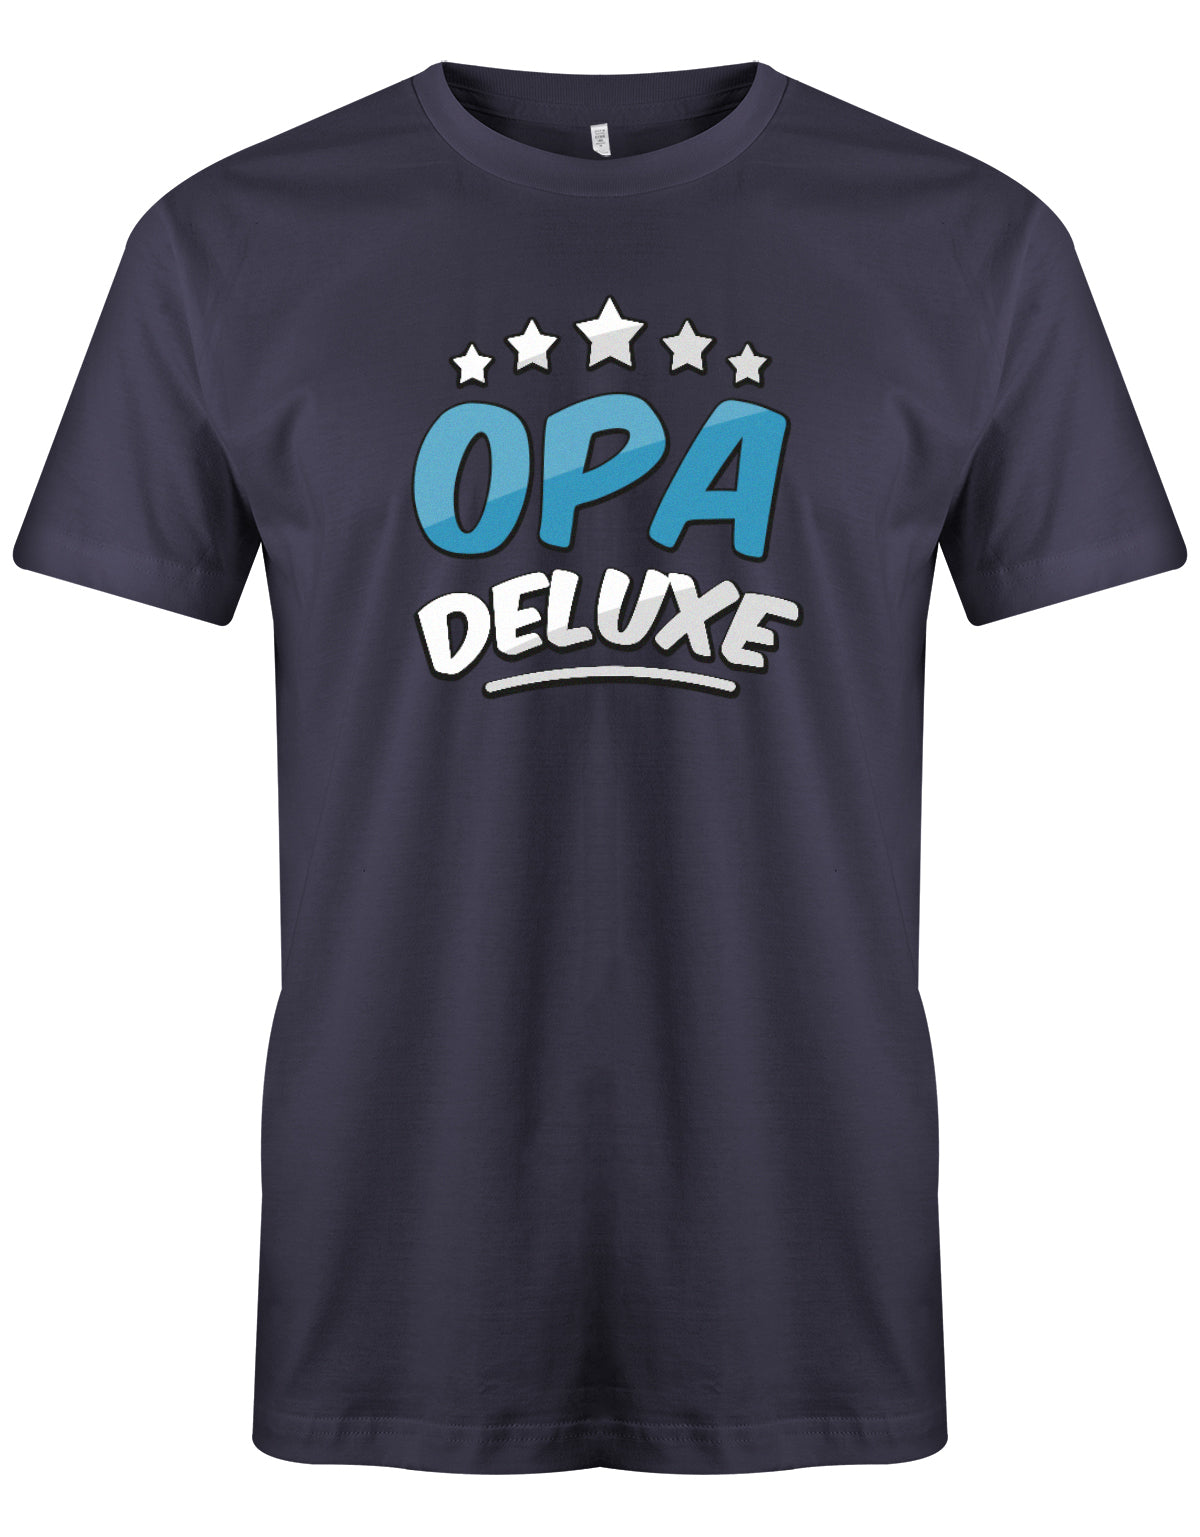 Opa T-Shirt – 5 Sterne Opa Deluxe. Navy